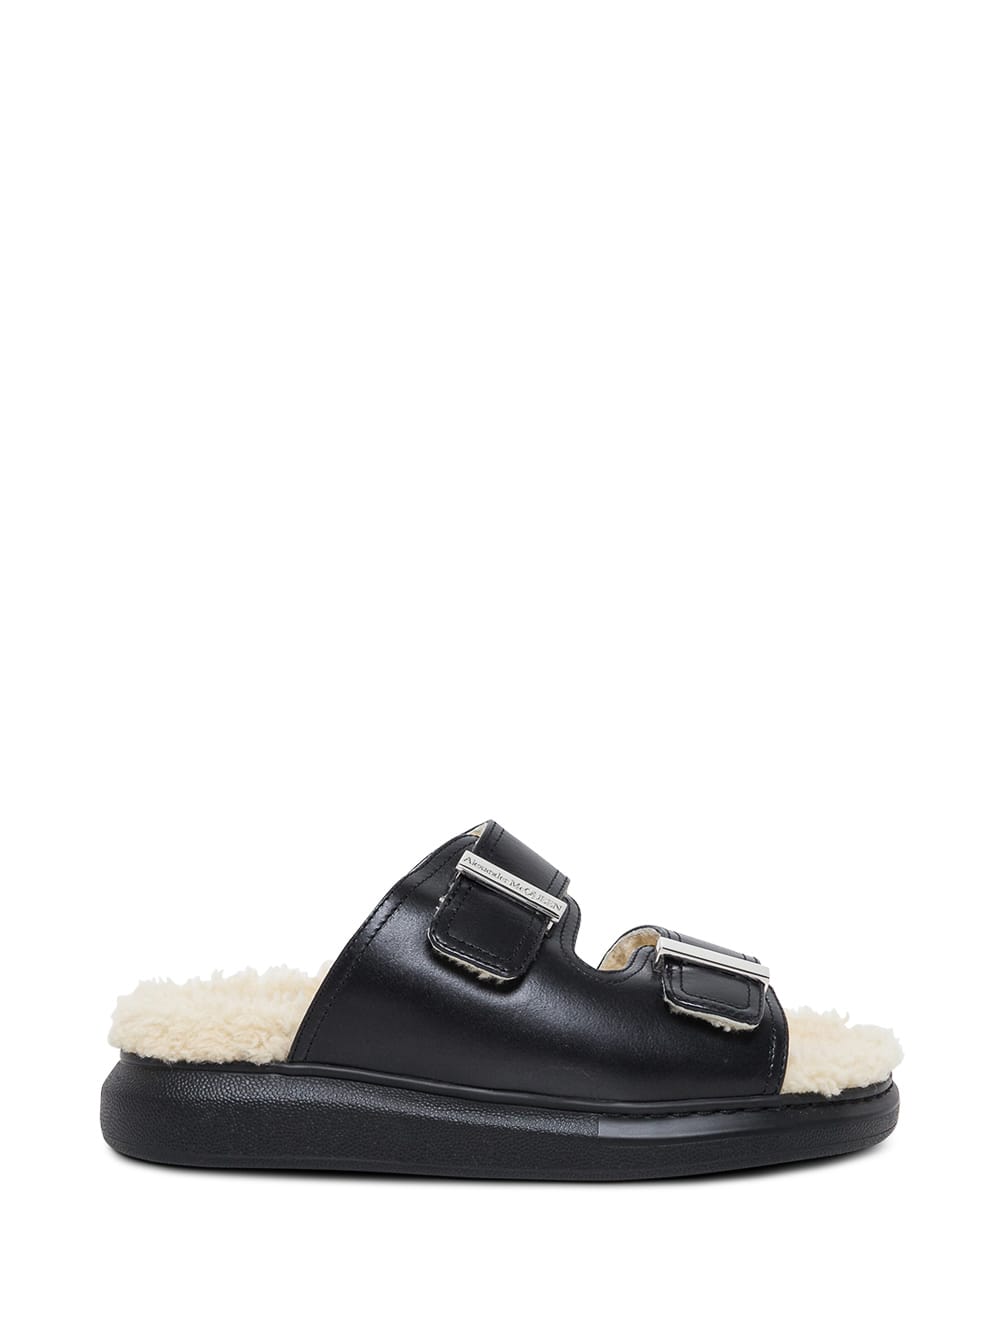 Alexander McQueen Leather And Shearling Black Sandals